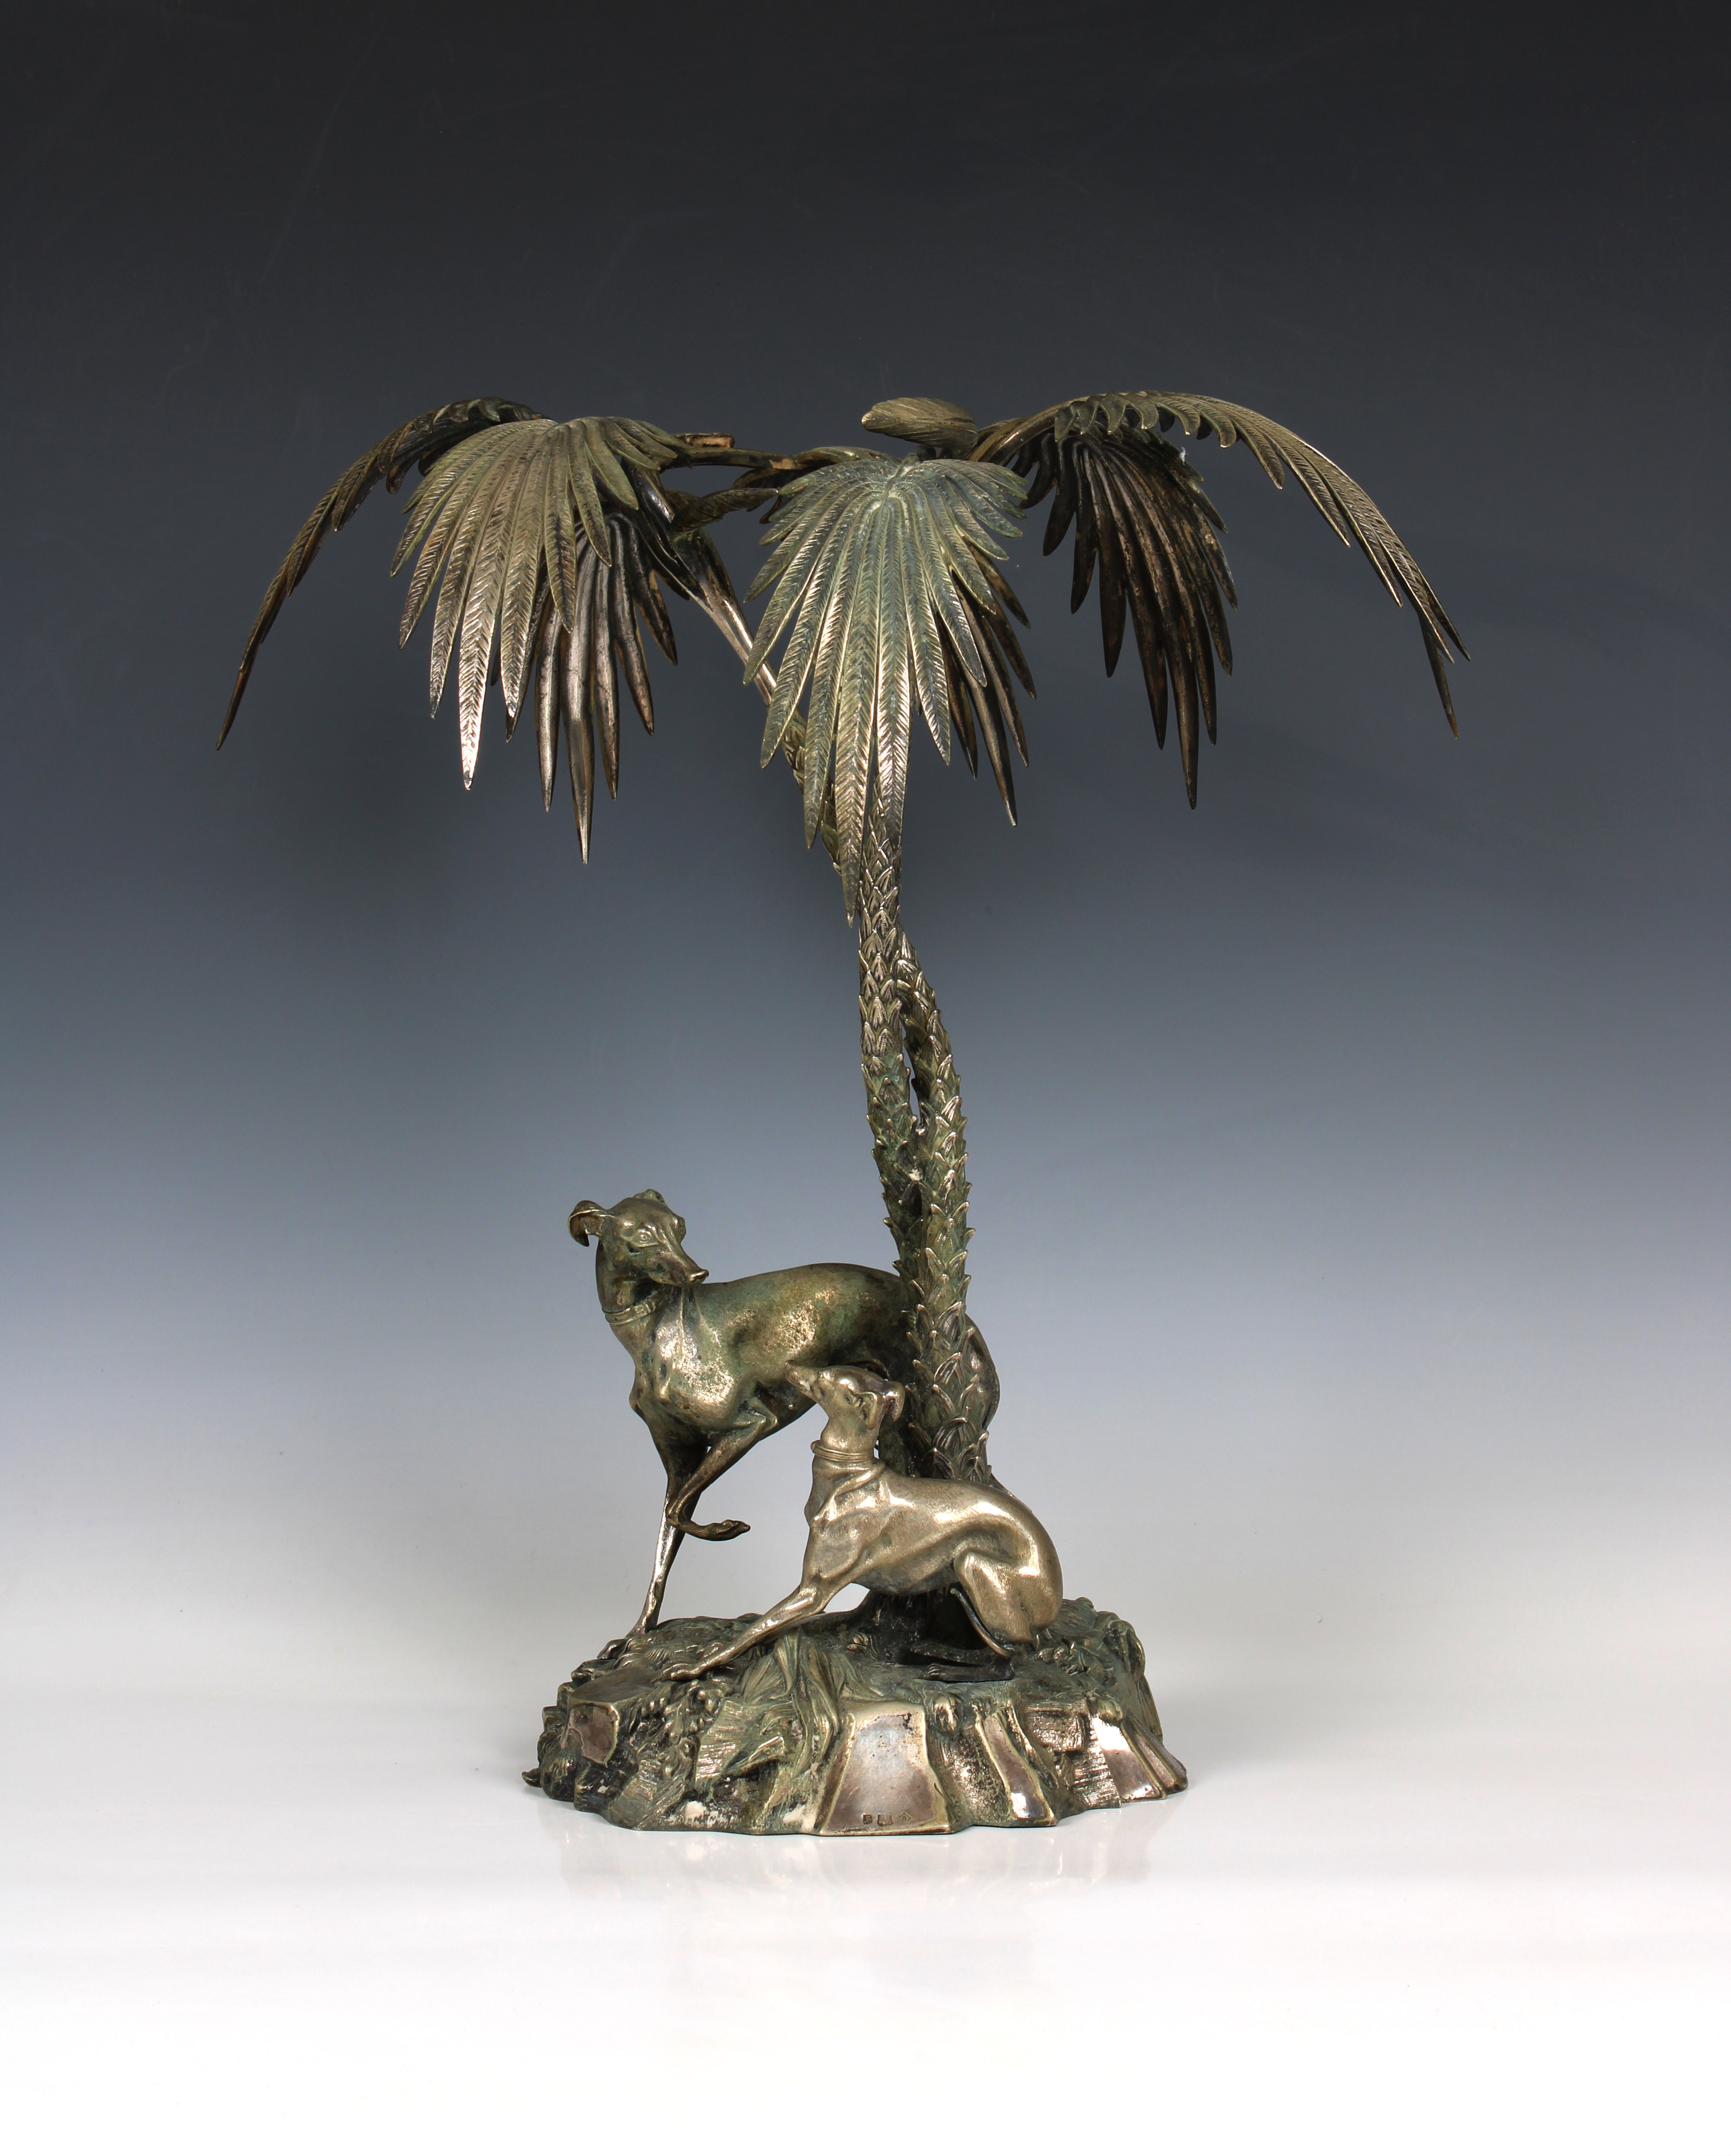 A silver plated centrepiece in the form of two greyhounds sheltering beneath palm trees